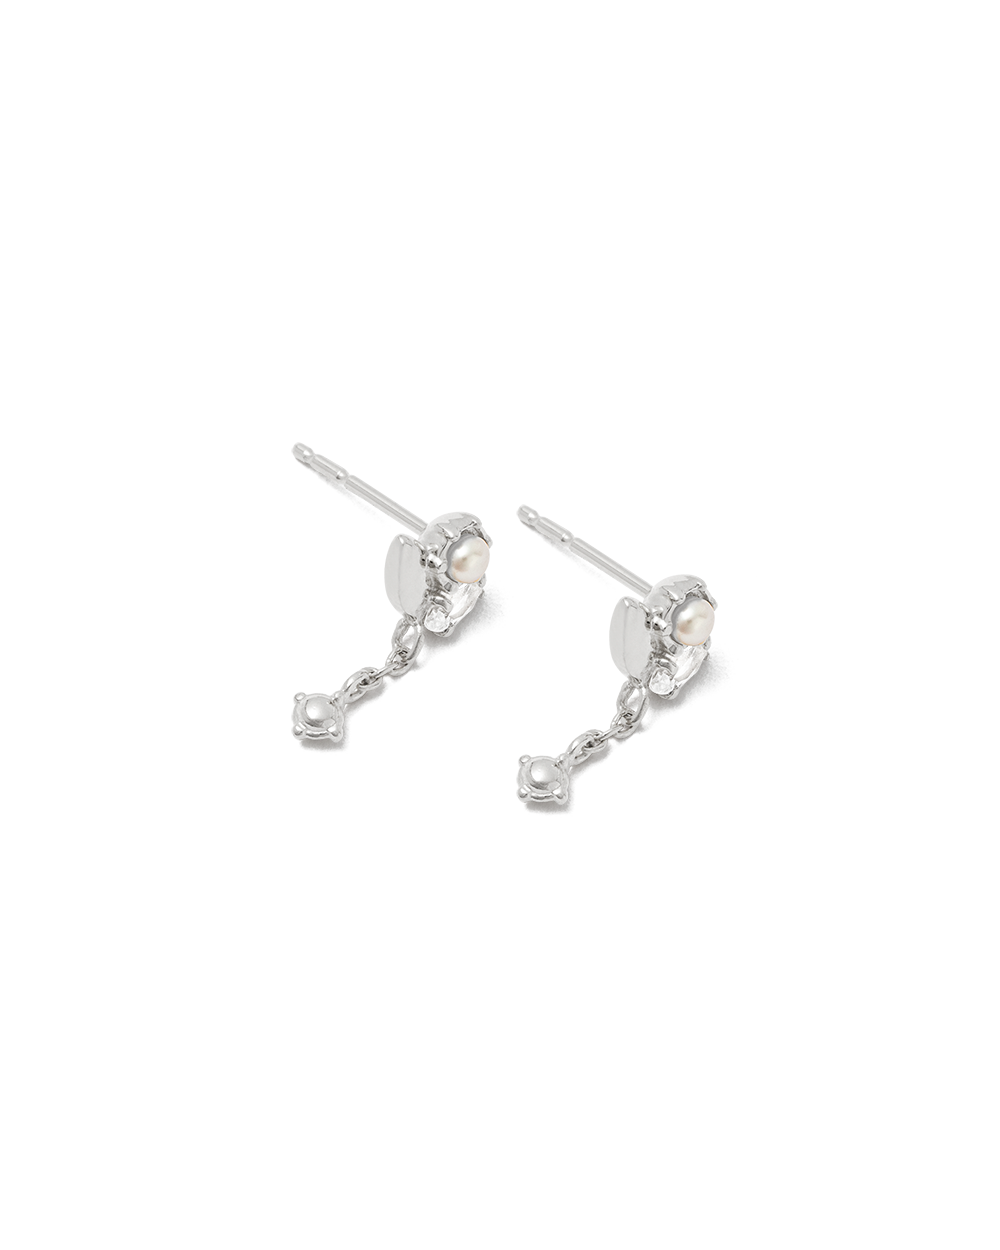 SLICE CLUSTER CHAIN STUDS (STERLING SILVER) - IMAGE 4